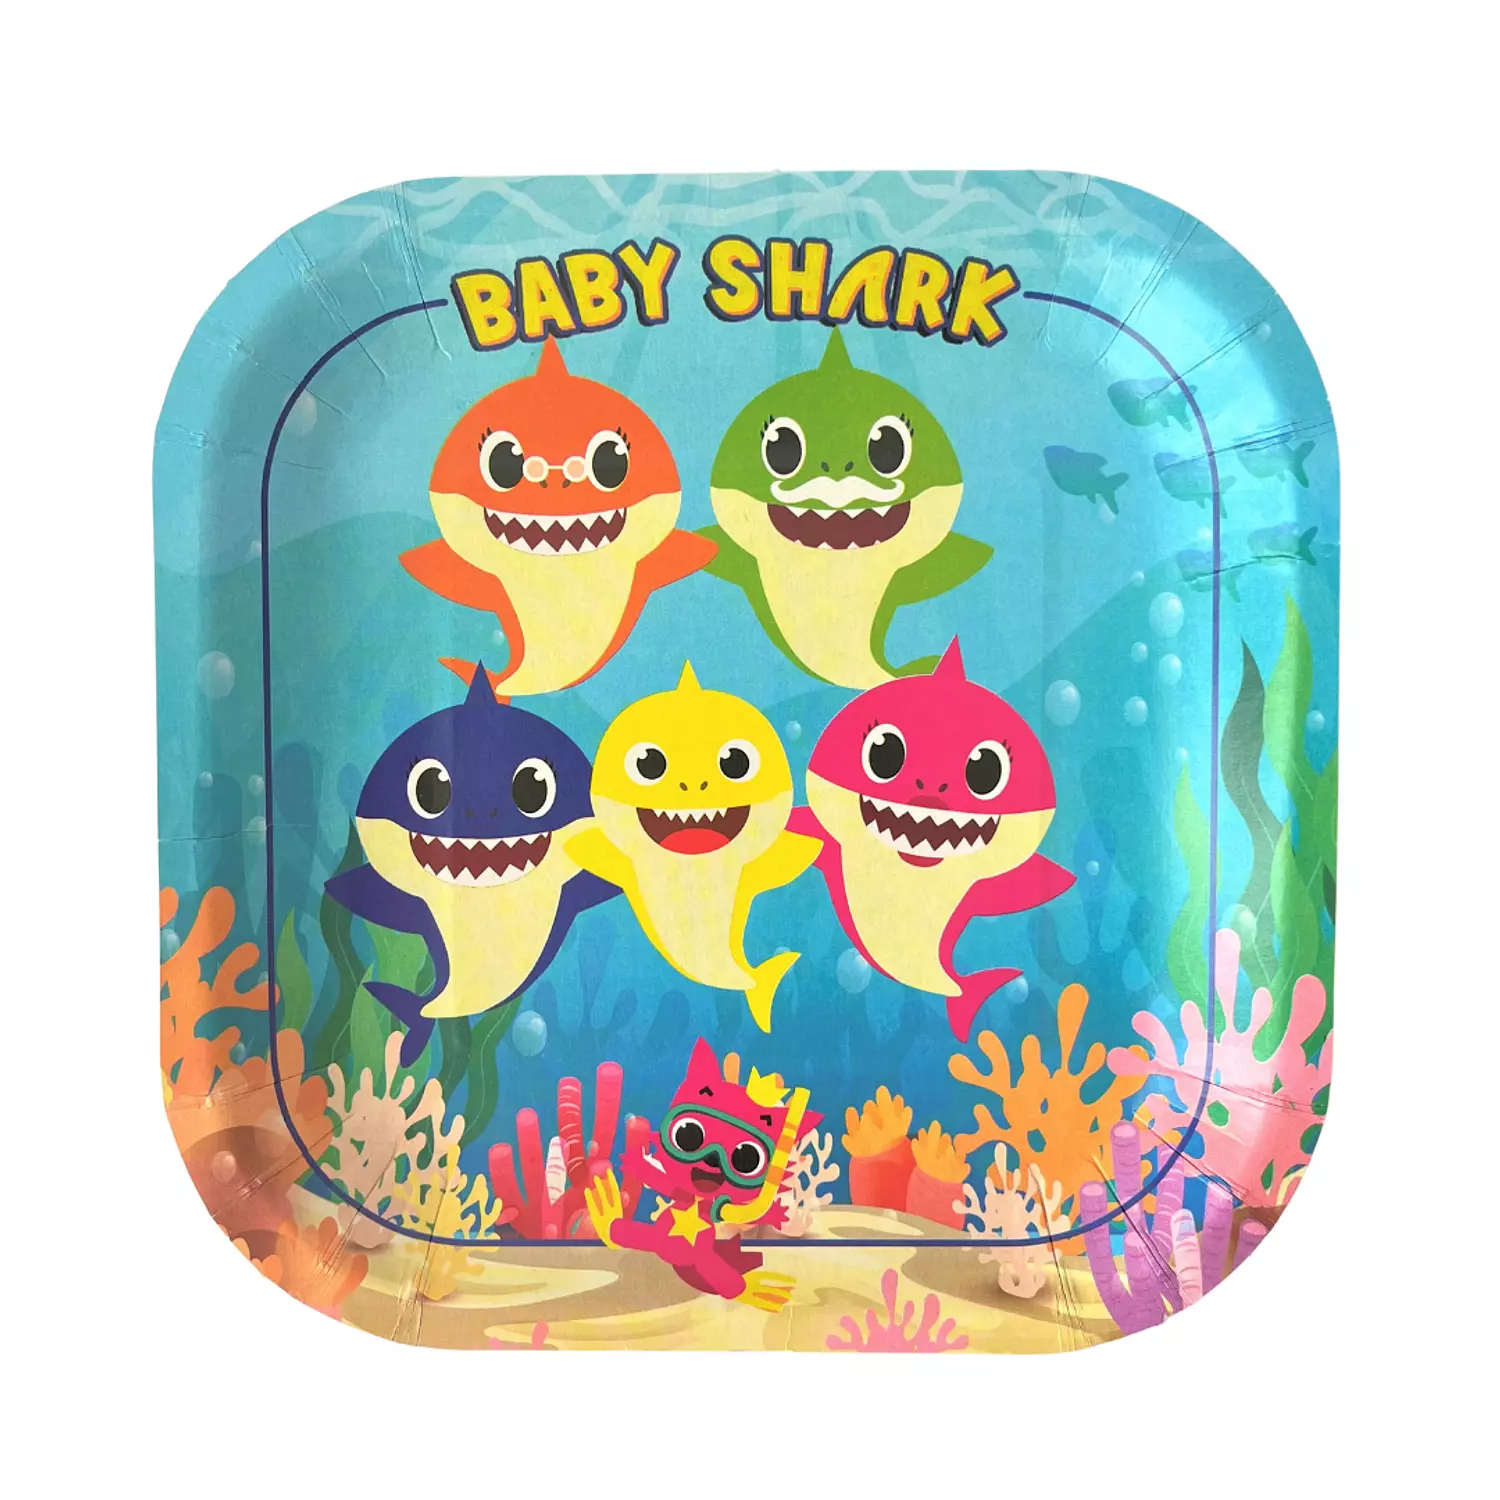 Baby Shark Square Paper Plates hover image